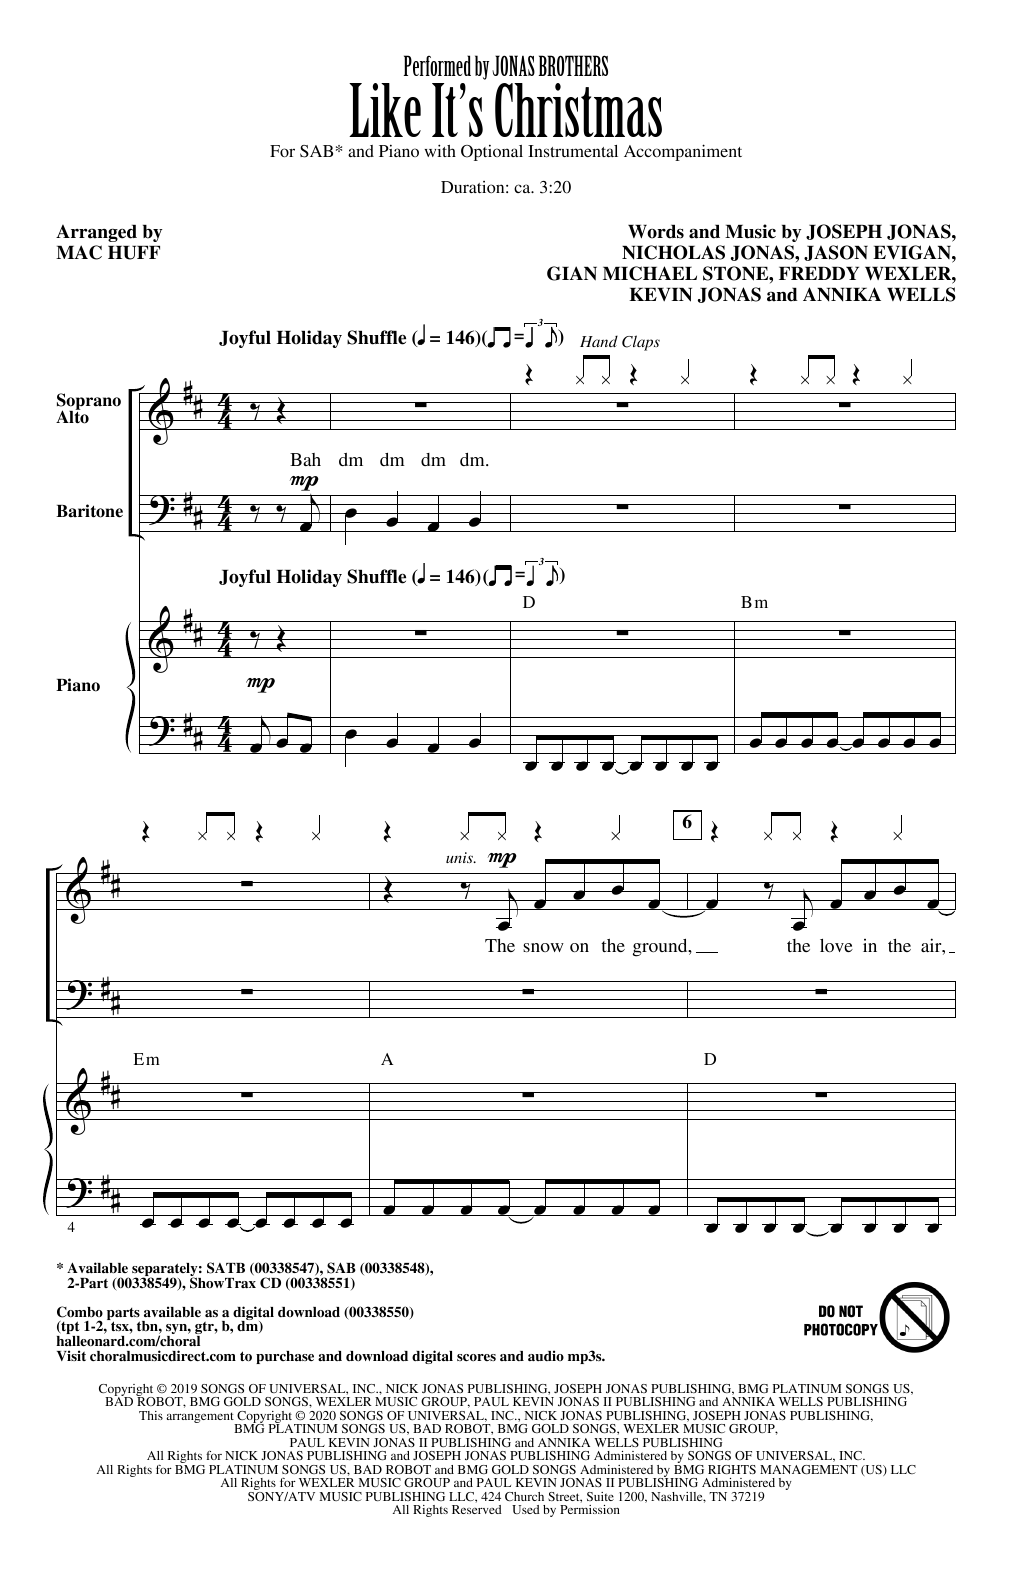 Jonas Brothers Like It's Christmas (arr. Mac Huff) sheet music preview music notes and score for SATB Choir including 14 page(s)